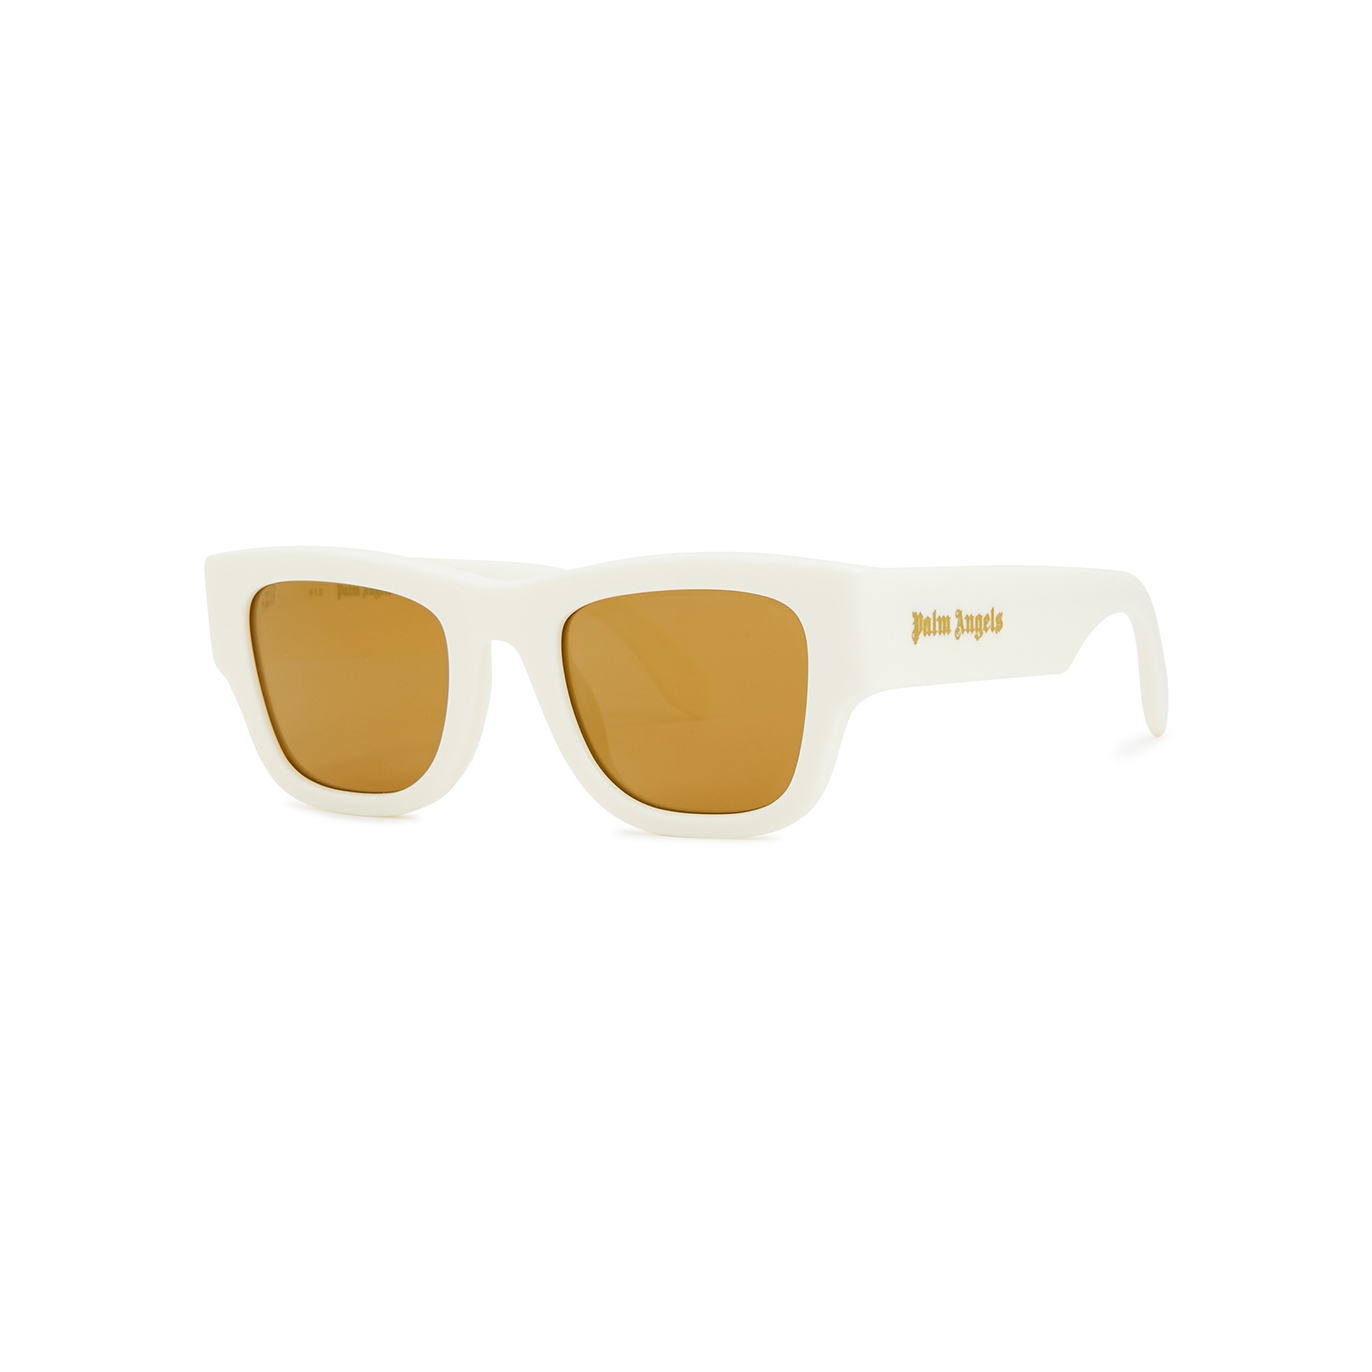 Palm Angels Volcan Square-frame Sunglasses, Sunglasses, Mirrored - White